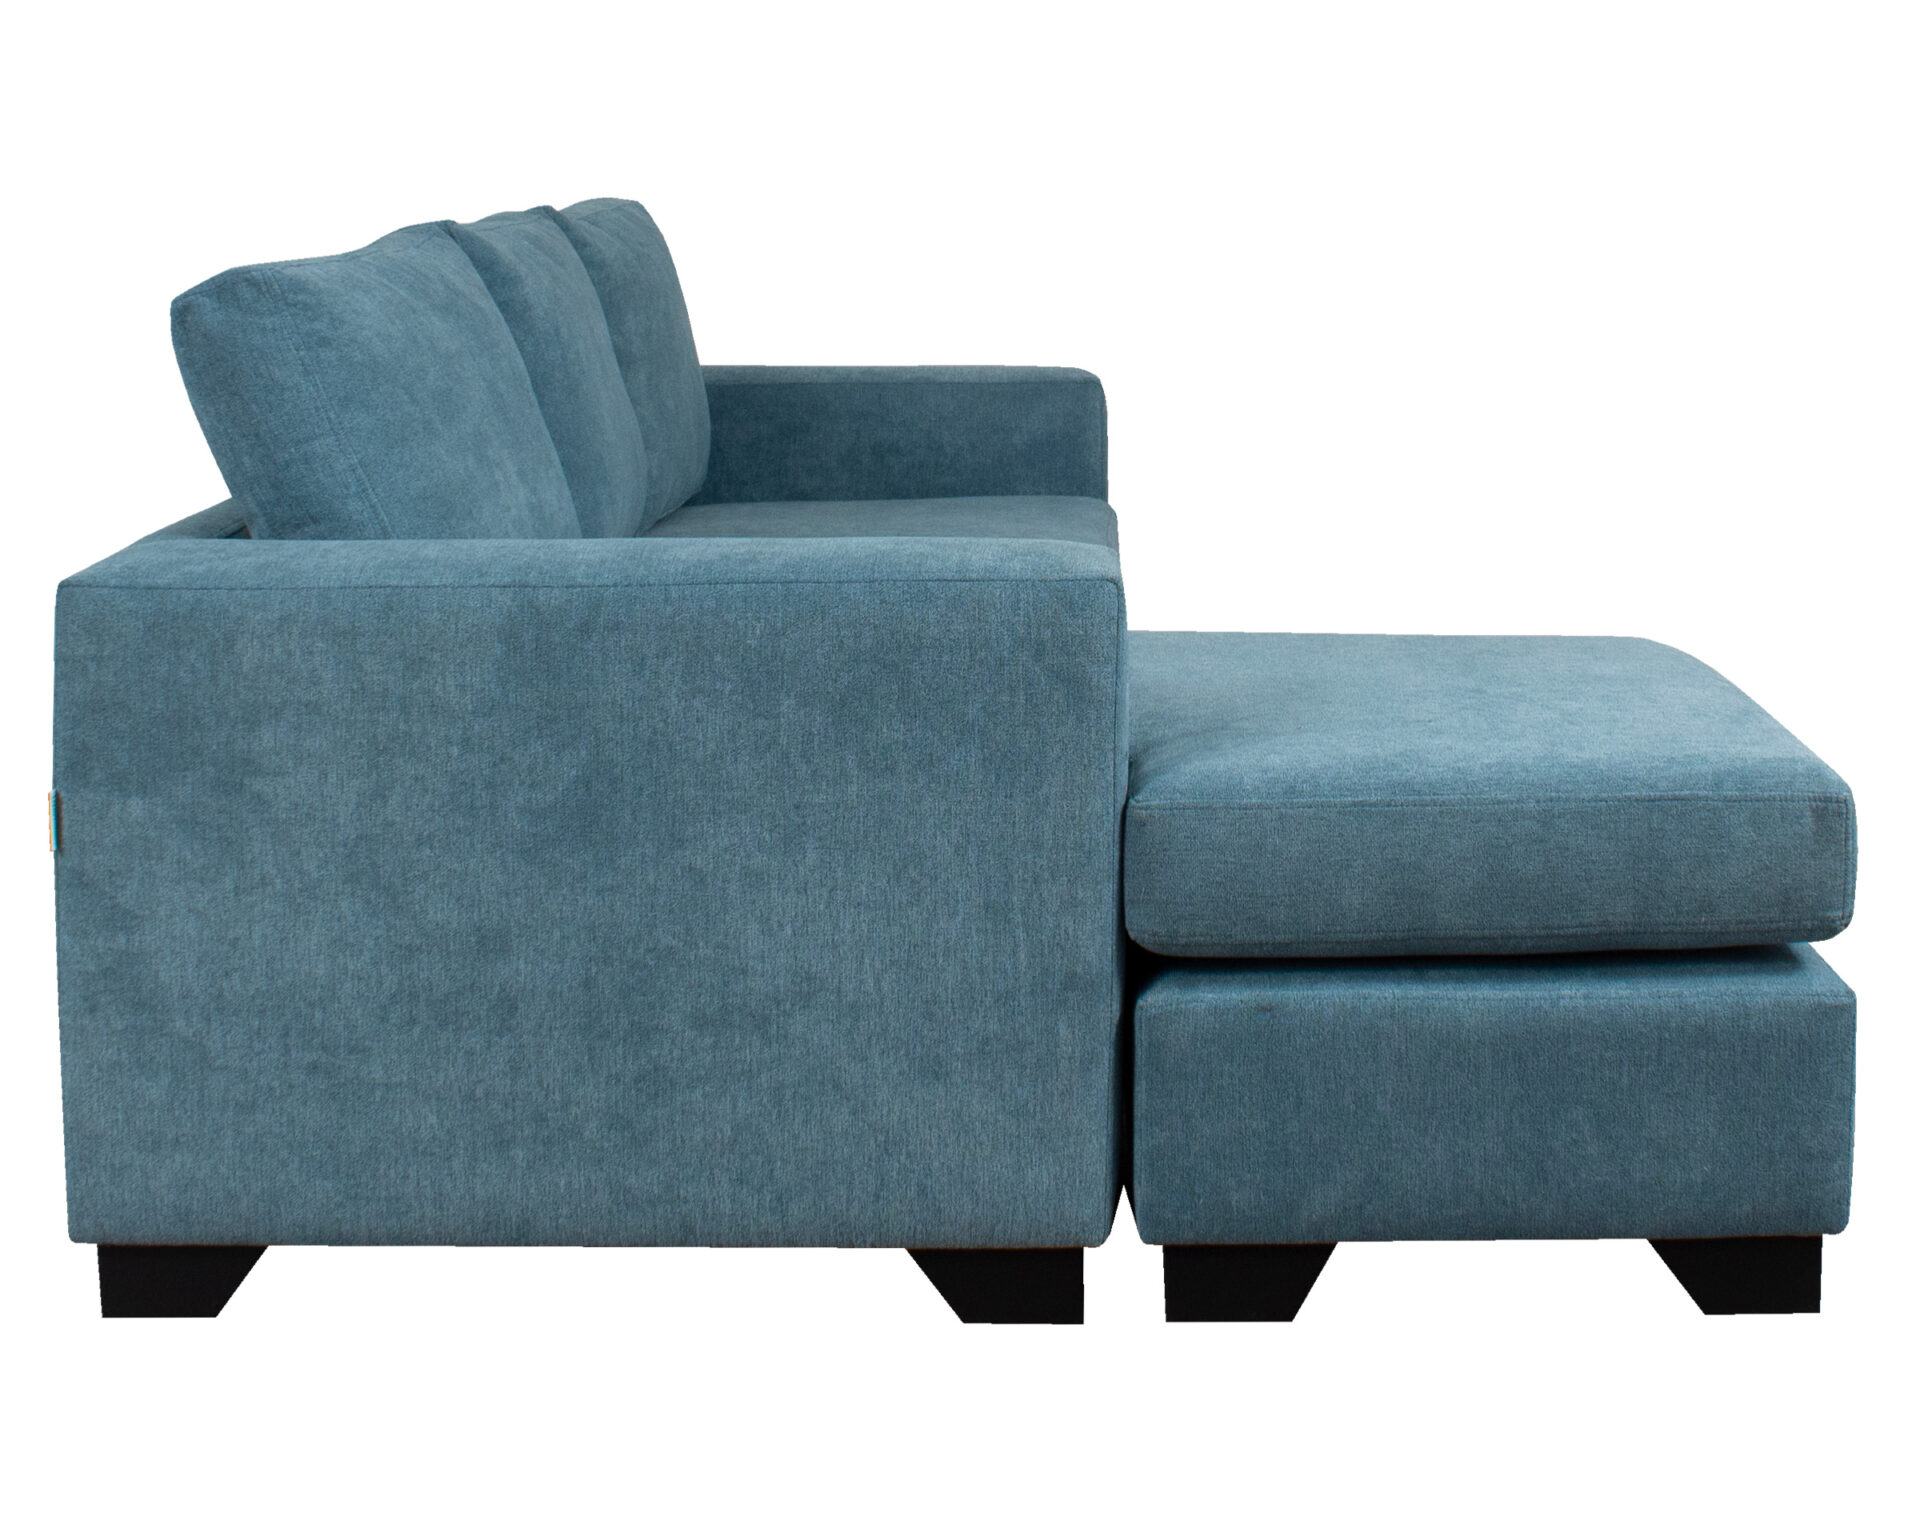 sofa modular 3 cuerpos intercambiable finesse royal lateral 1